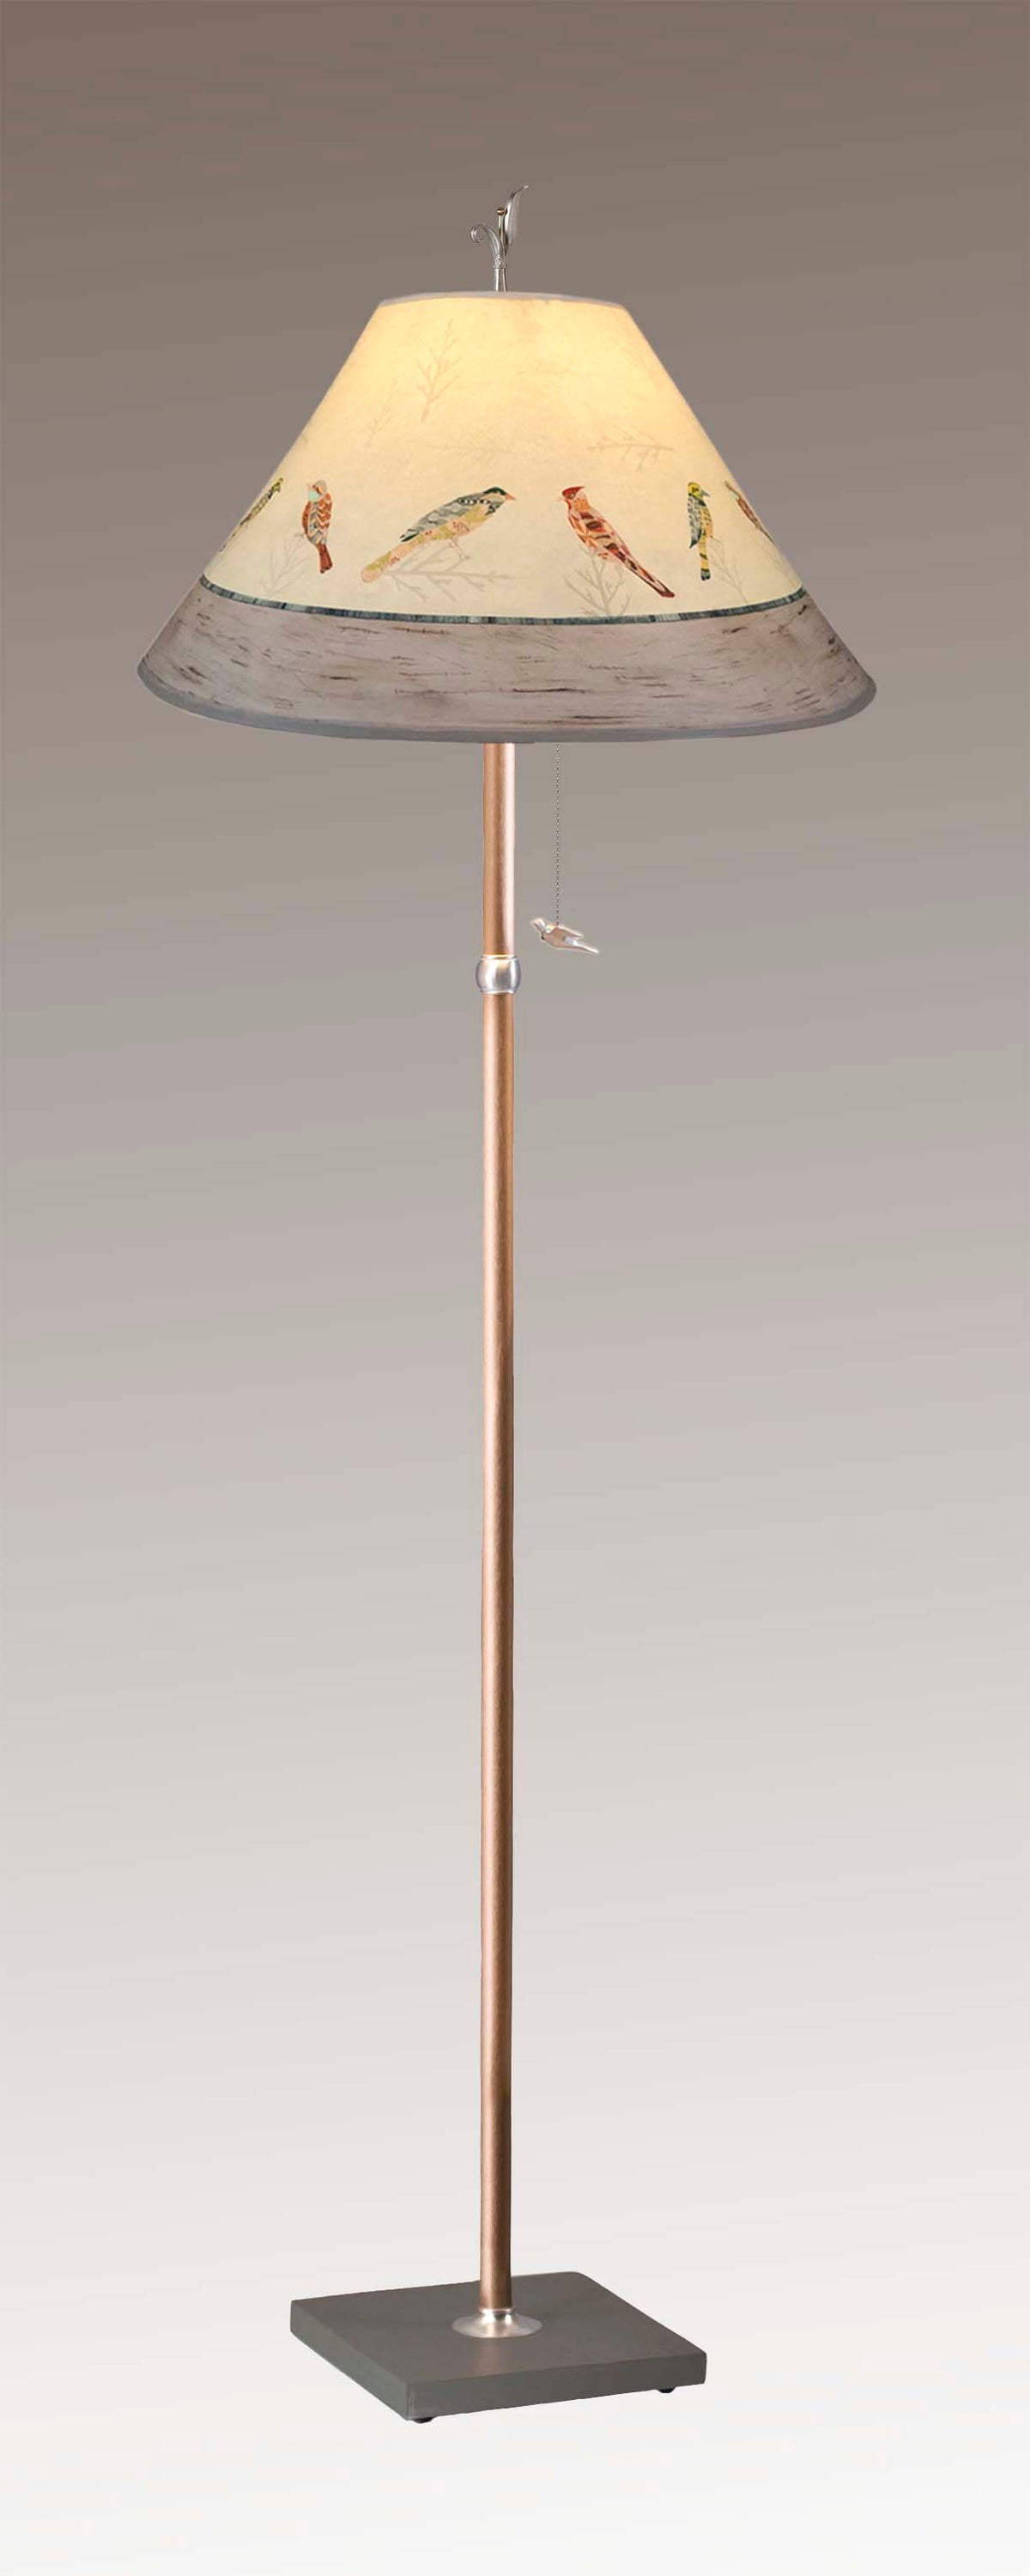 Copper Floor Lamp with Large Conical Shade in Bird Friends